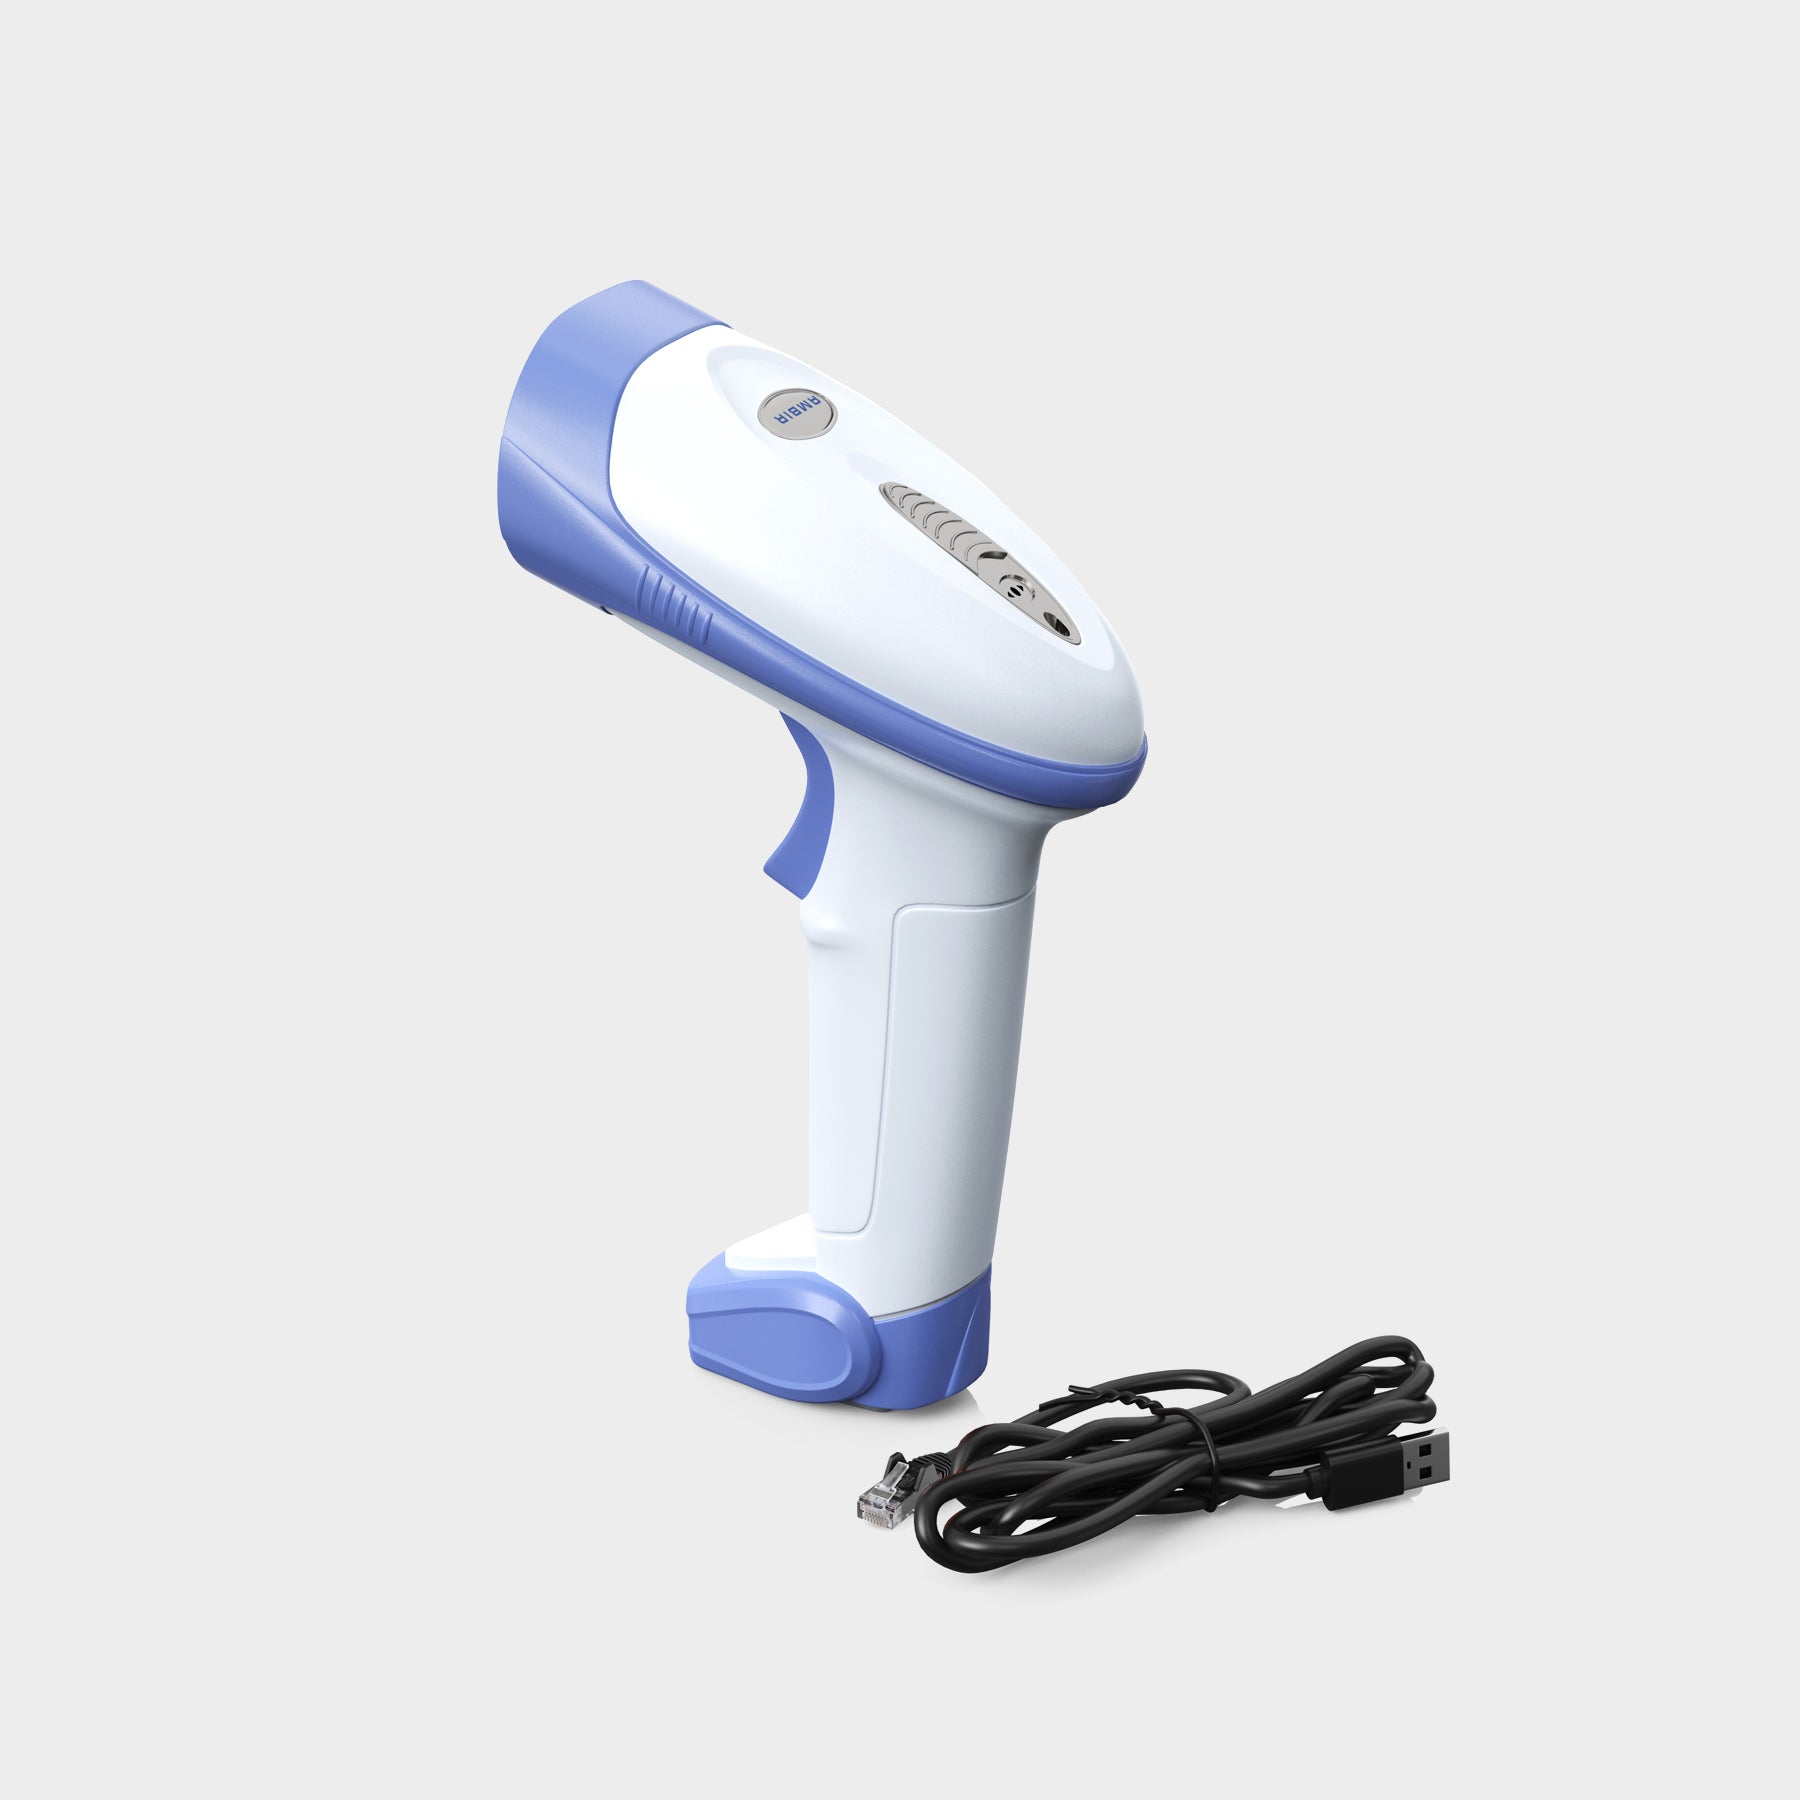 AMBIR BR100 USB Barcode Scanner - White/Blue (BR100-WH)